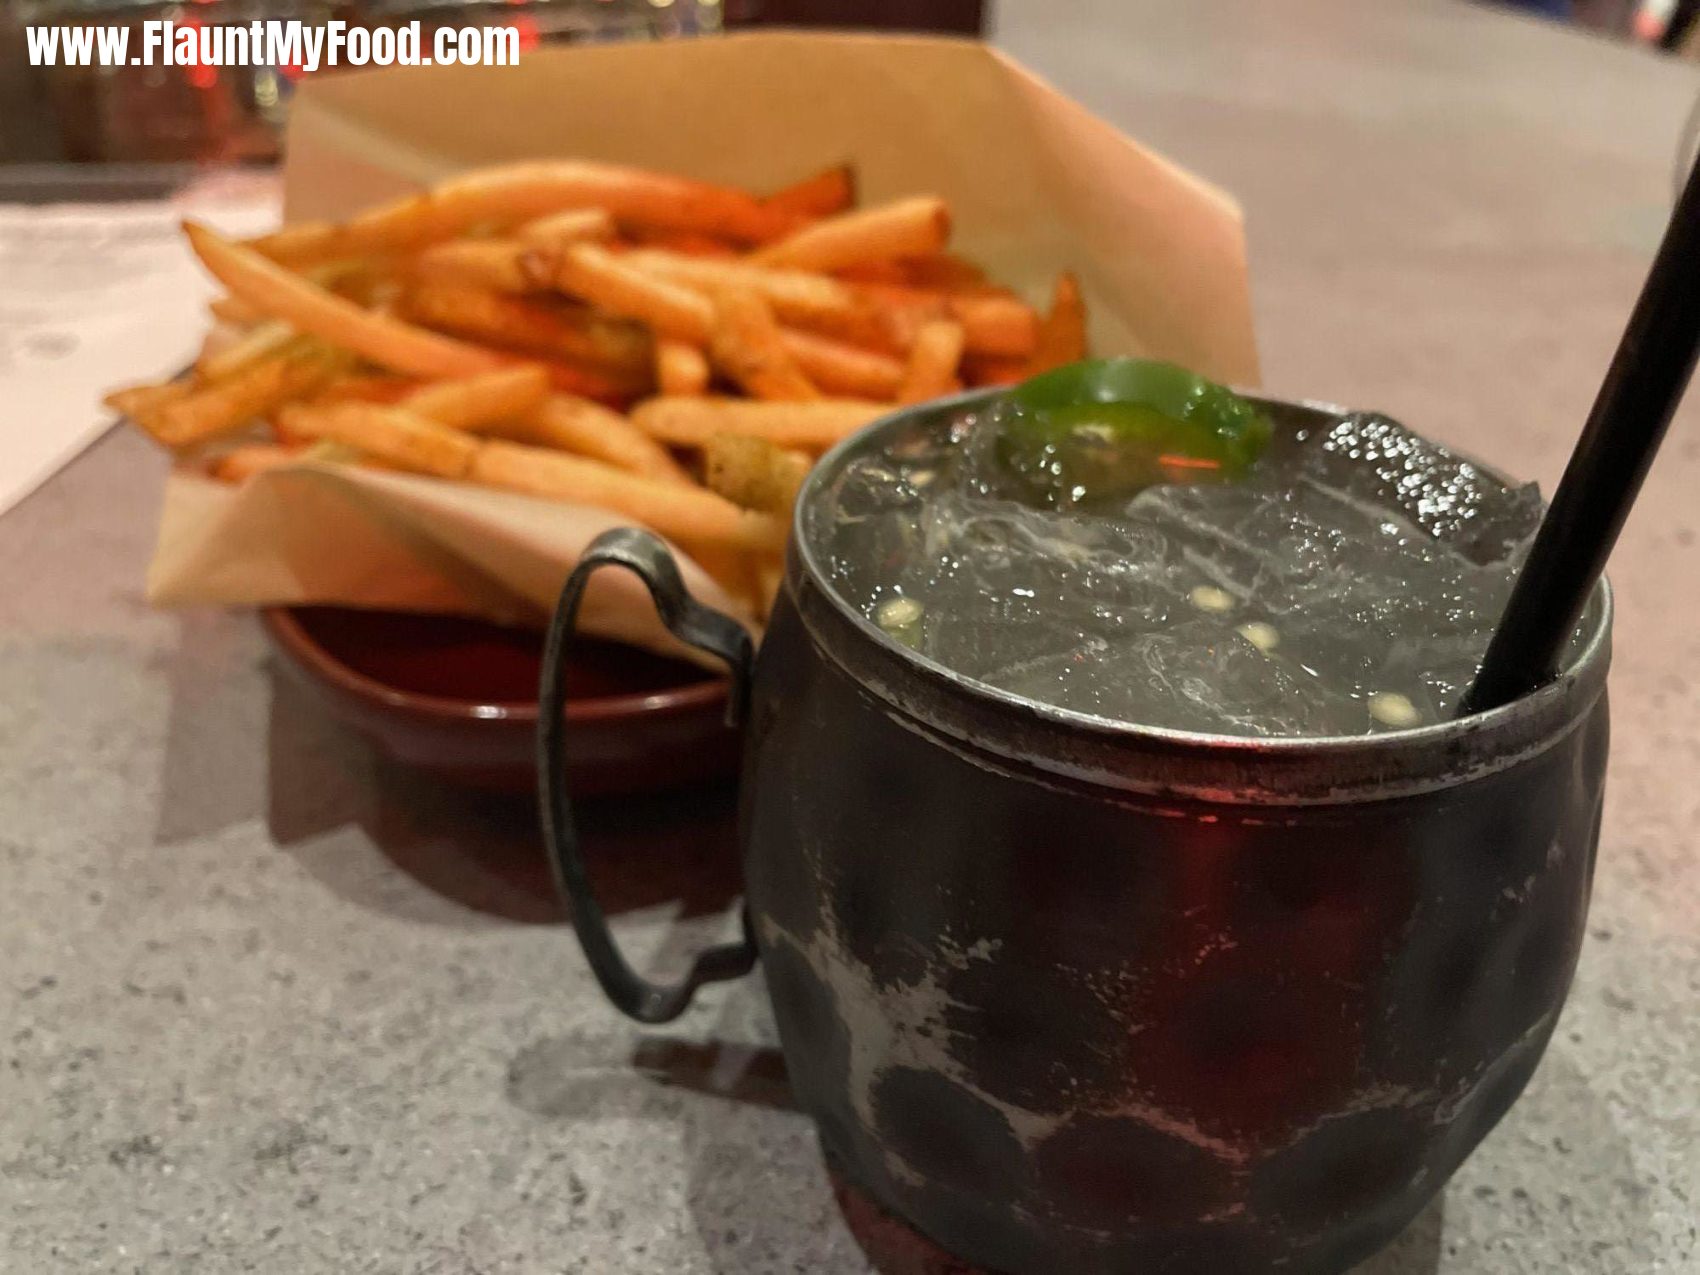 Tricky Fish in Fort Worth Texas - fries and Moscow mule at the tricky fishTricky Fish in Fort Worth Texas - fries and Moscow mule at the tricky fish